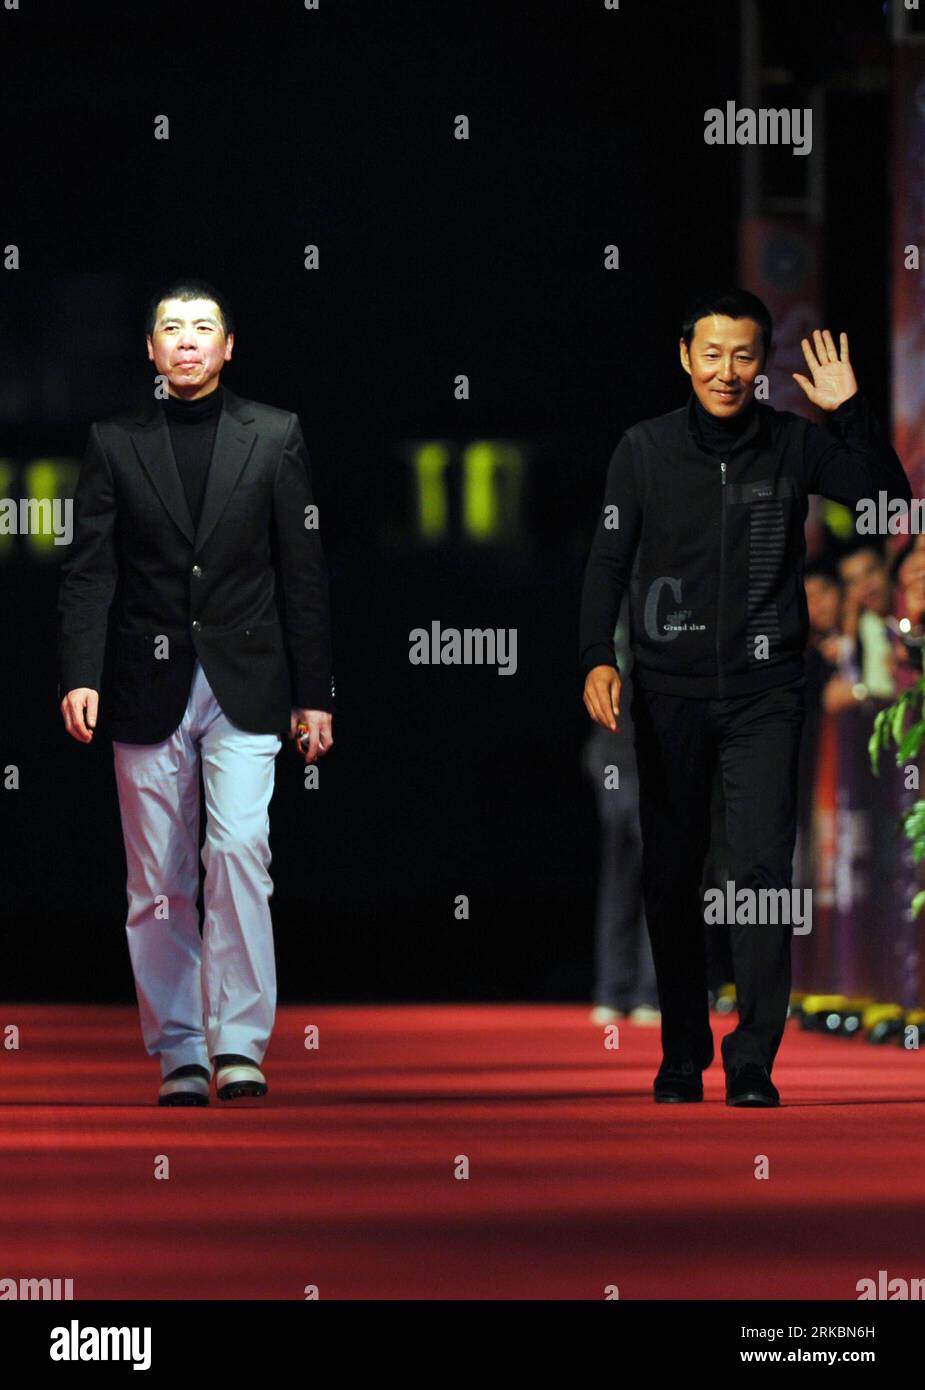 Bildnummer: 54585742  Datum: 29.10.2010  Copyright: imago/Xinhua (101029) -- HAIKOU, Oct. 29, 2010 (Xinhua) -- Chinese director Feng Xiaogang (L) and actor Chen Daoming walk on the red carpet at a charity banquet during the Mission Hills Star Trophy in Haikou, capital of south China s Hainan Province, Oct. 29, 2010. The Mission Hills Star Trophy is held between Oct. 28 and Oct. 31. (Xinhua/Guo Cheng) CHINA-HAINAN-GOLF-STAR TROPHY(CN) PUBLICATIONxNOTxINxCHN Entertainment People Film kbdig xcb 2010 hoch     Bildnummer 54585742 Date 29 10 2010 Copyright Imago XINHUA  Haikou OCT 29 2010 XINHUA Chi Stock Photo